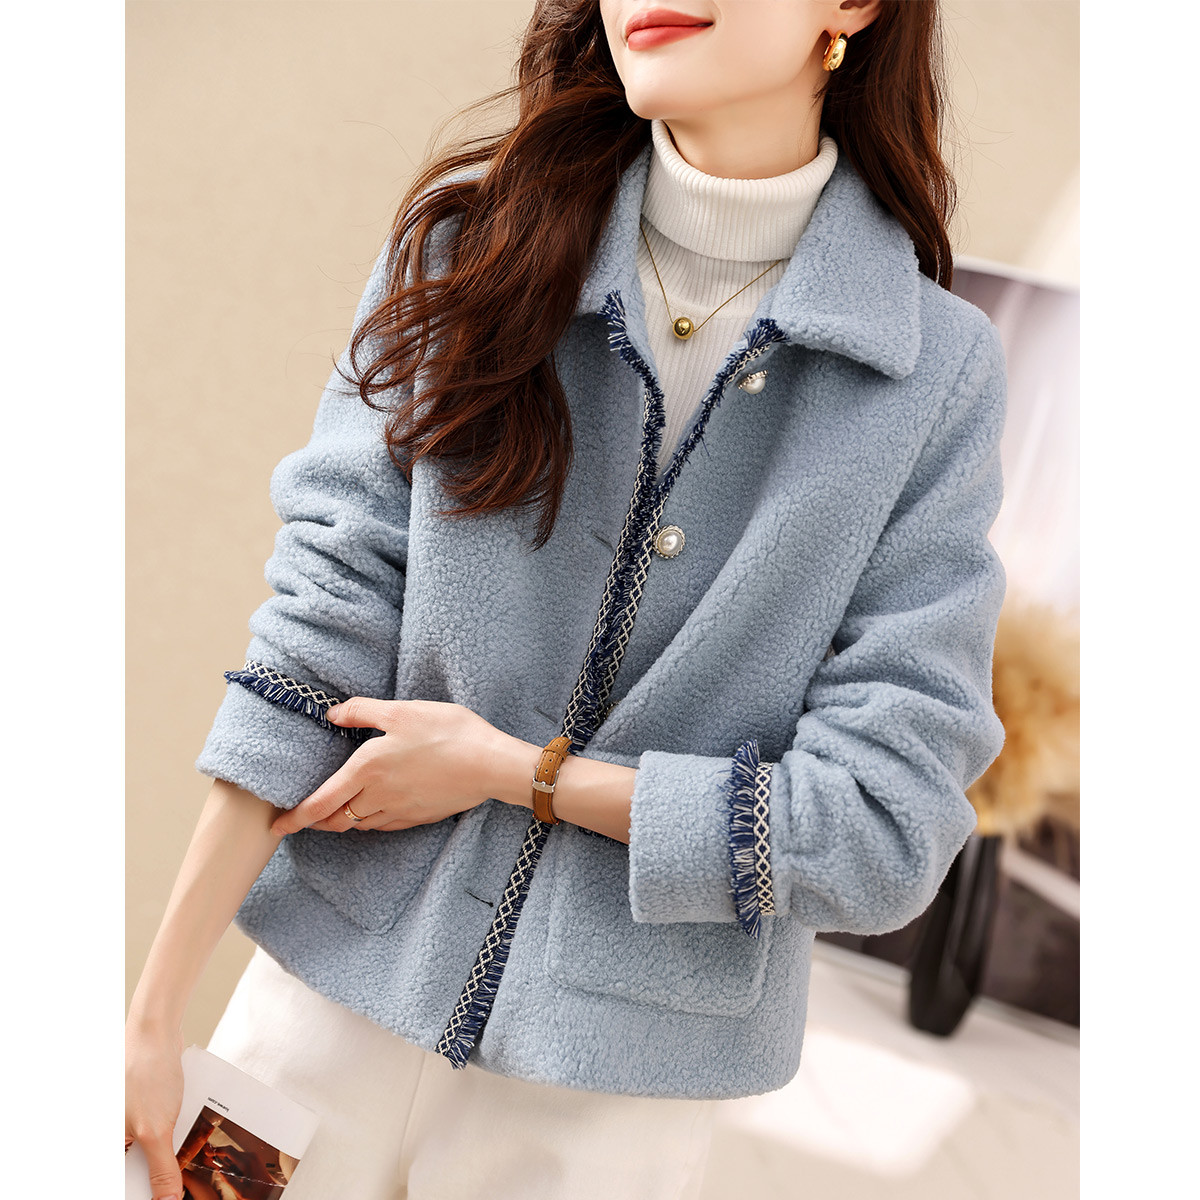 Thick lapel jacket refinement fashion and elegant tops